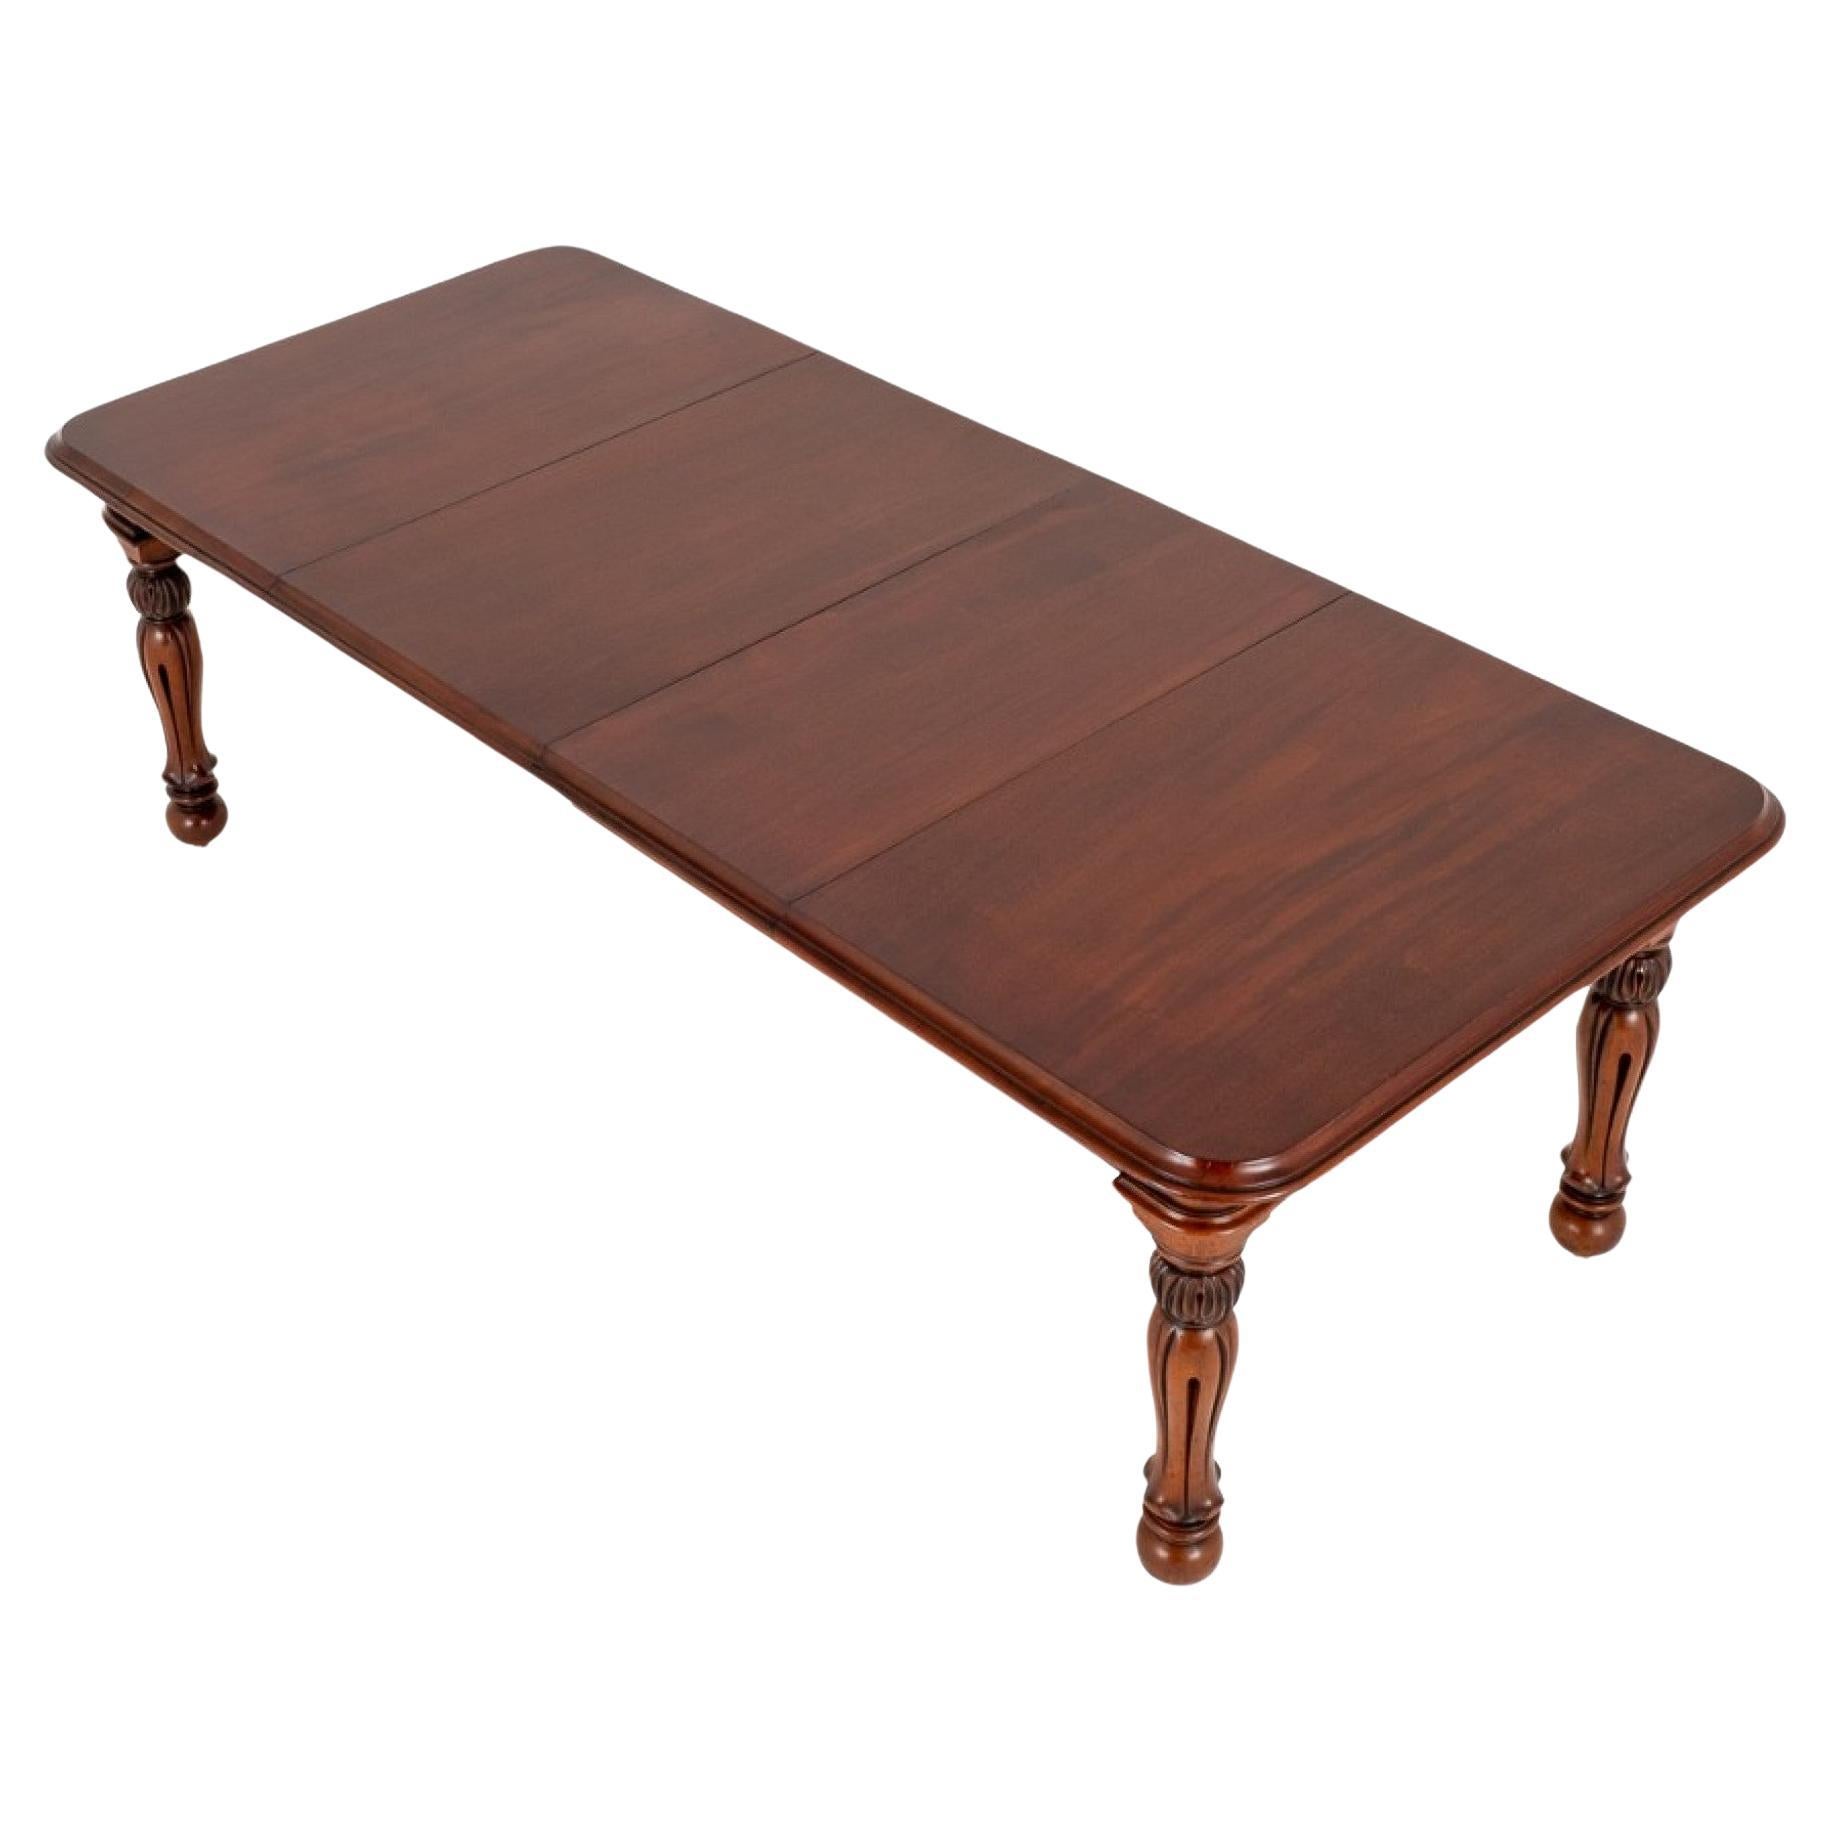 Victorian Dining Table Extending 2 Leaf Mahogany 1860 For Sale